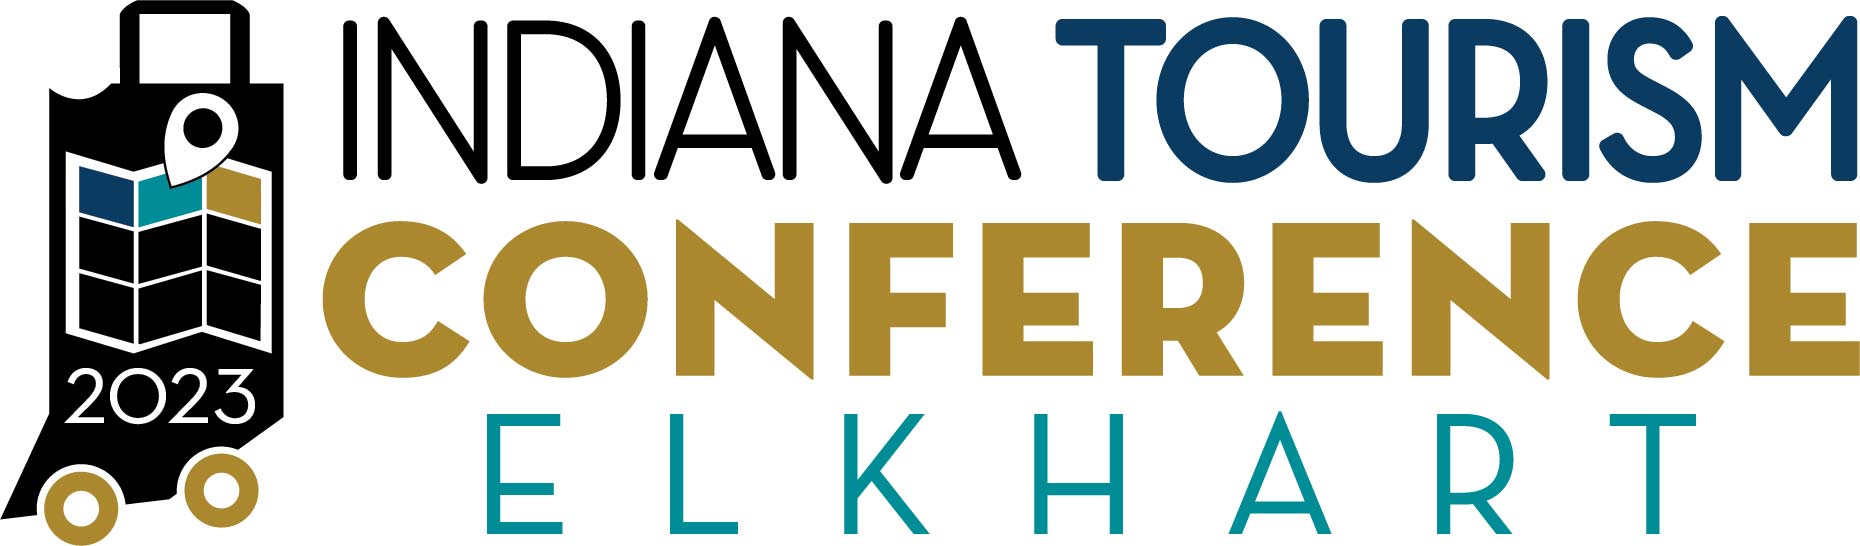 indiana tourism conference 2023